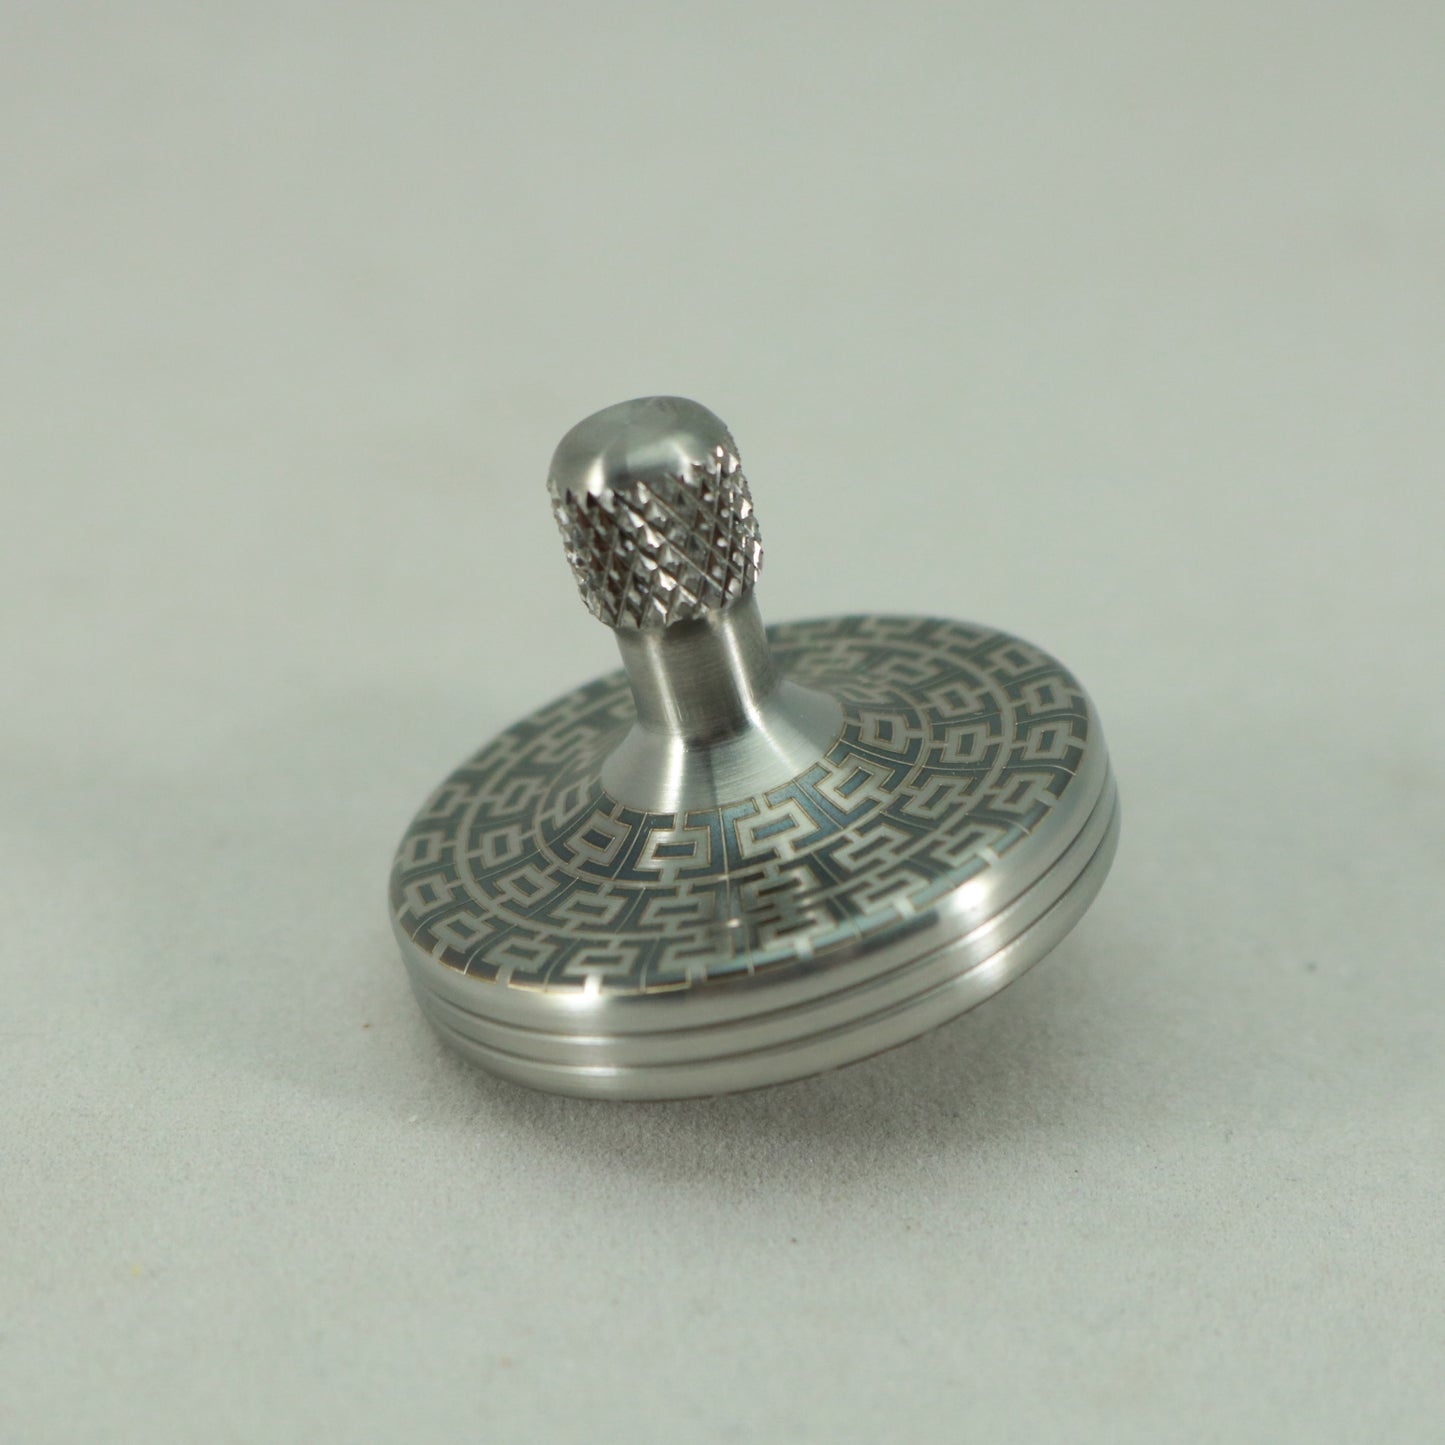 S2- Laser Etched I-Beam Pattern Stainless Steel Spinning Top